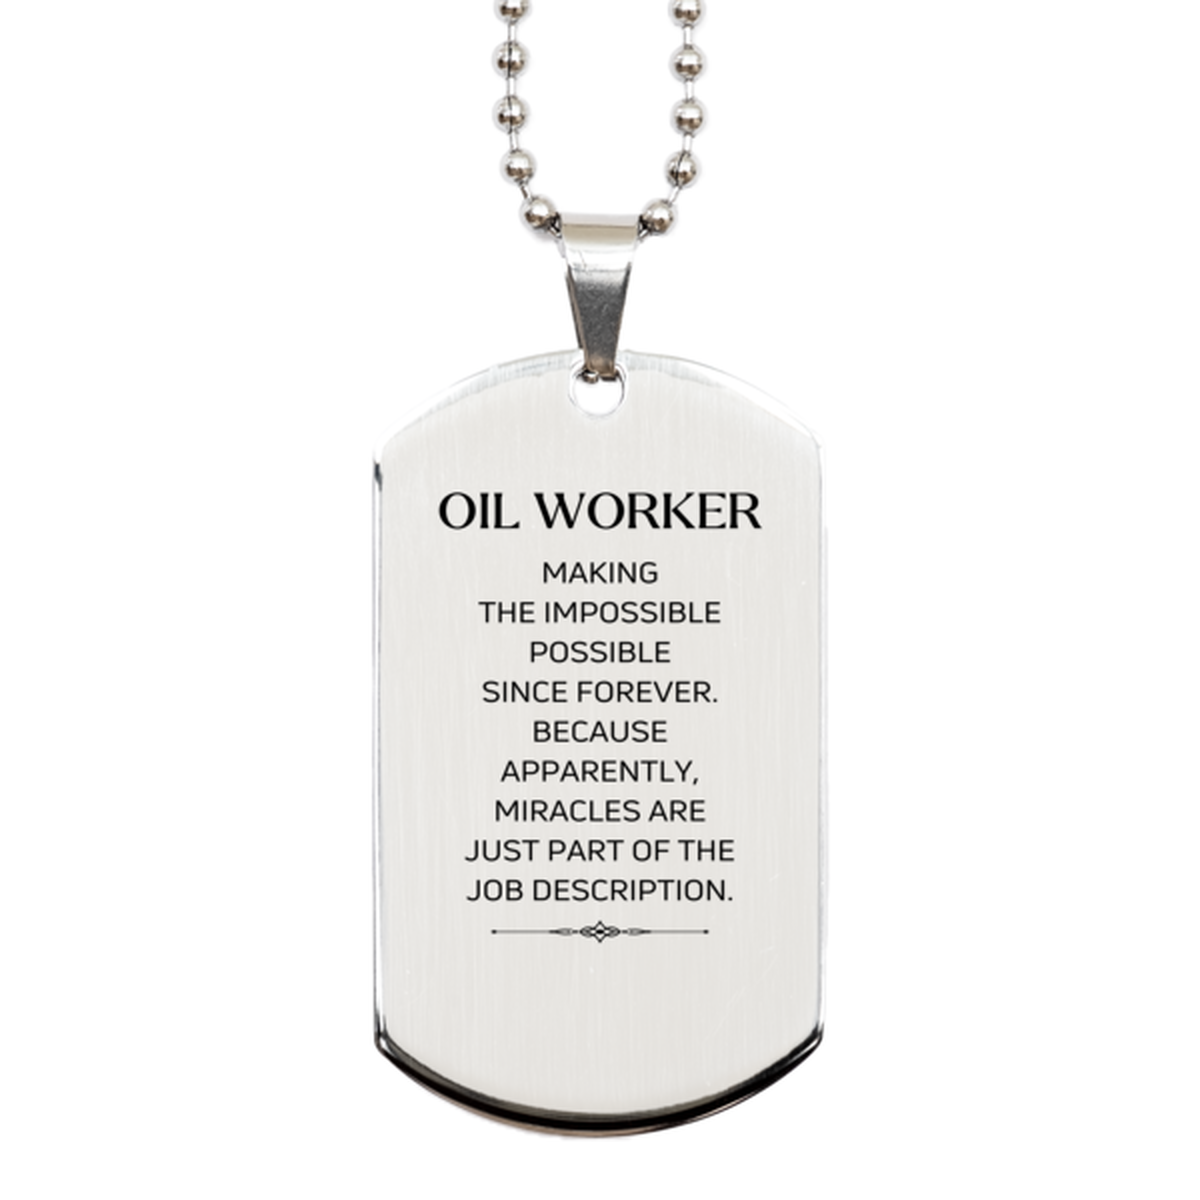 Funny Oil Worker Gifts, Miracles are just part of the job description, Inspirational Birthday Silver Dog Tag For Oil Worker, Men, Women, Coworkers, Friends, Boss